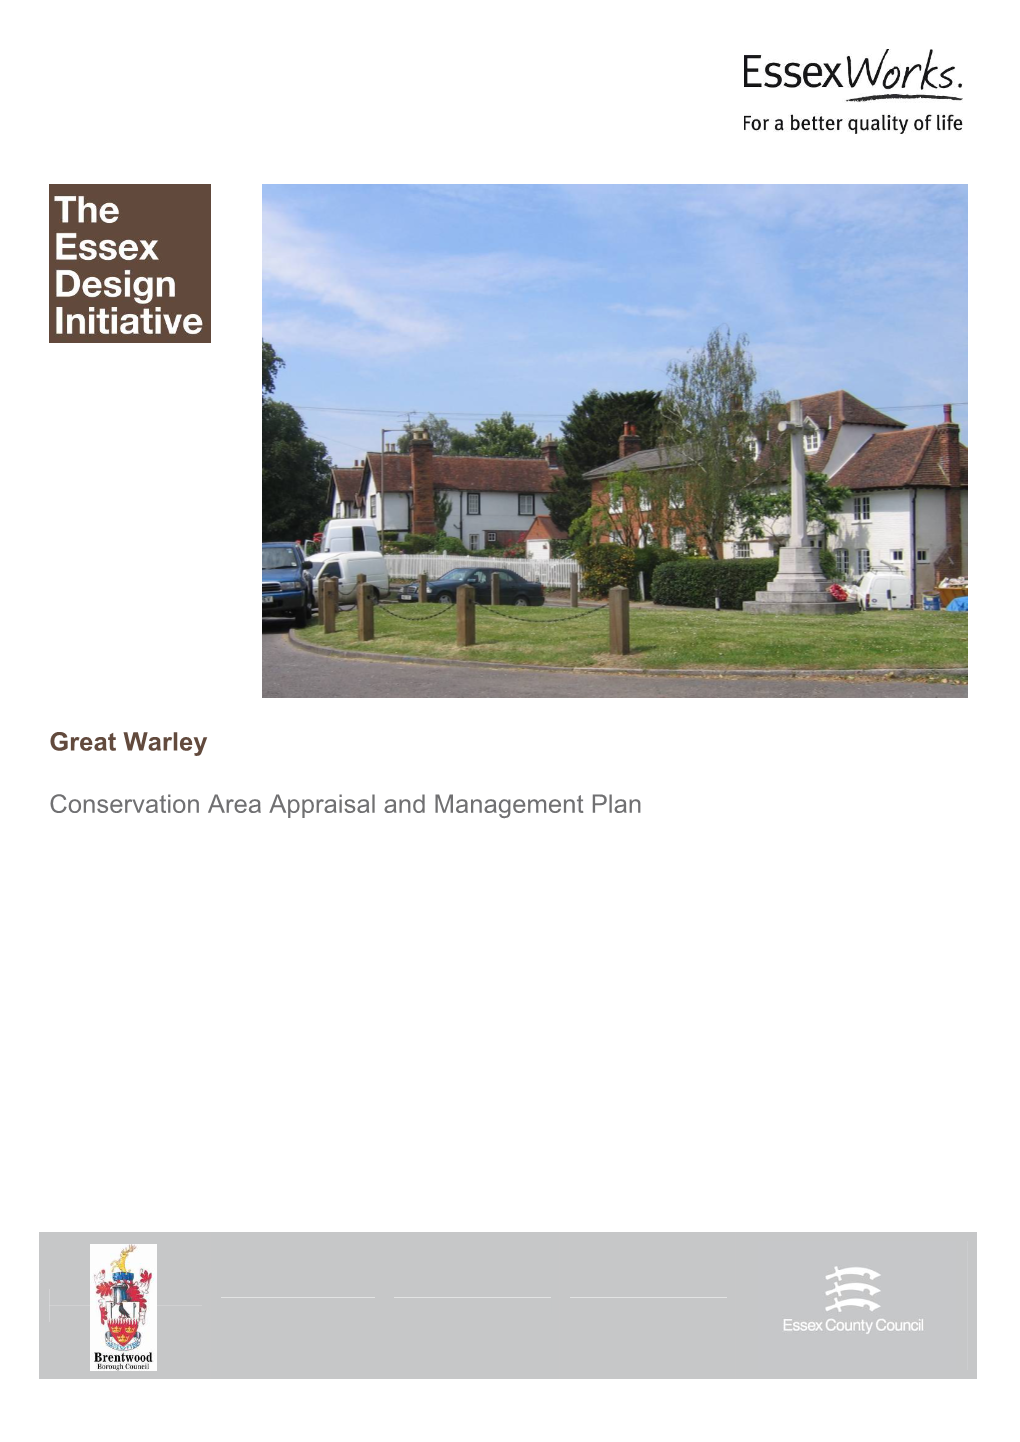 Great Warley Conservation Area Appraisal and Management Plan